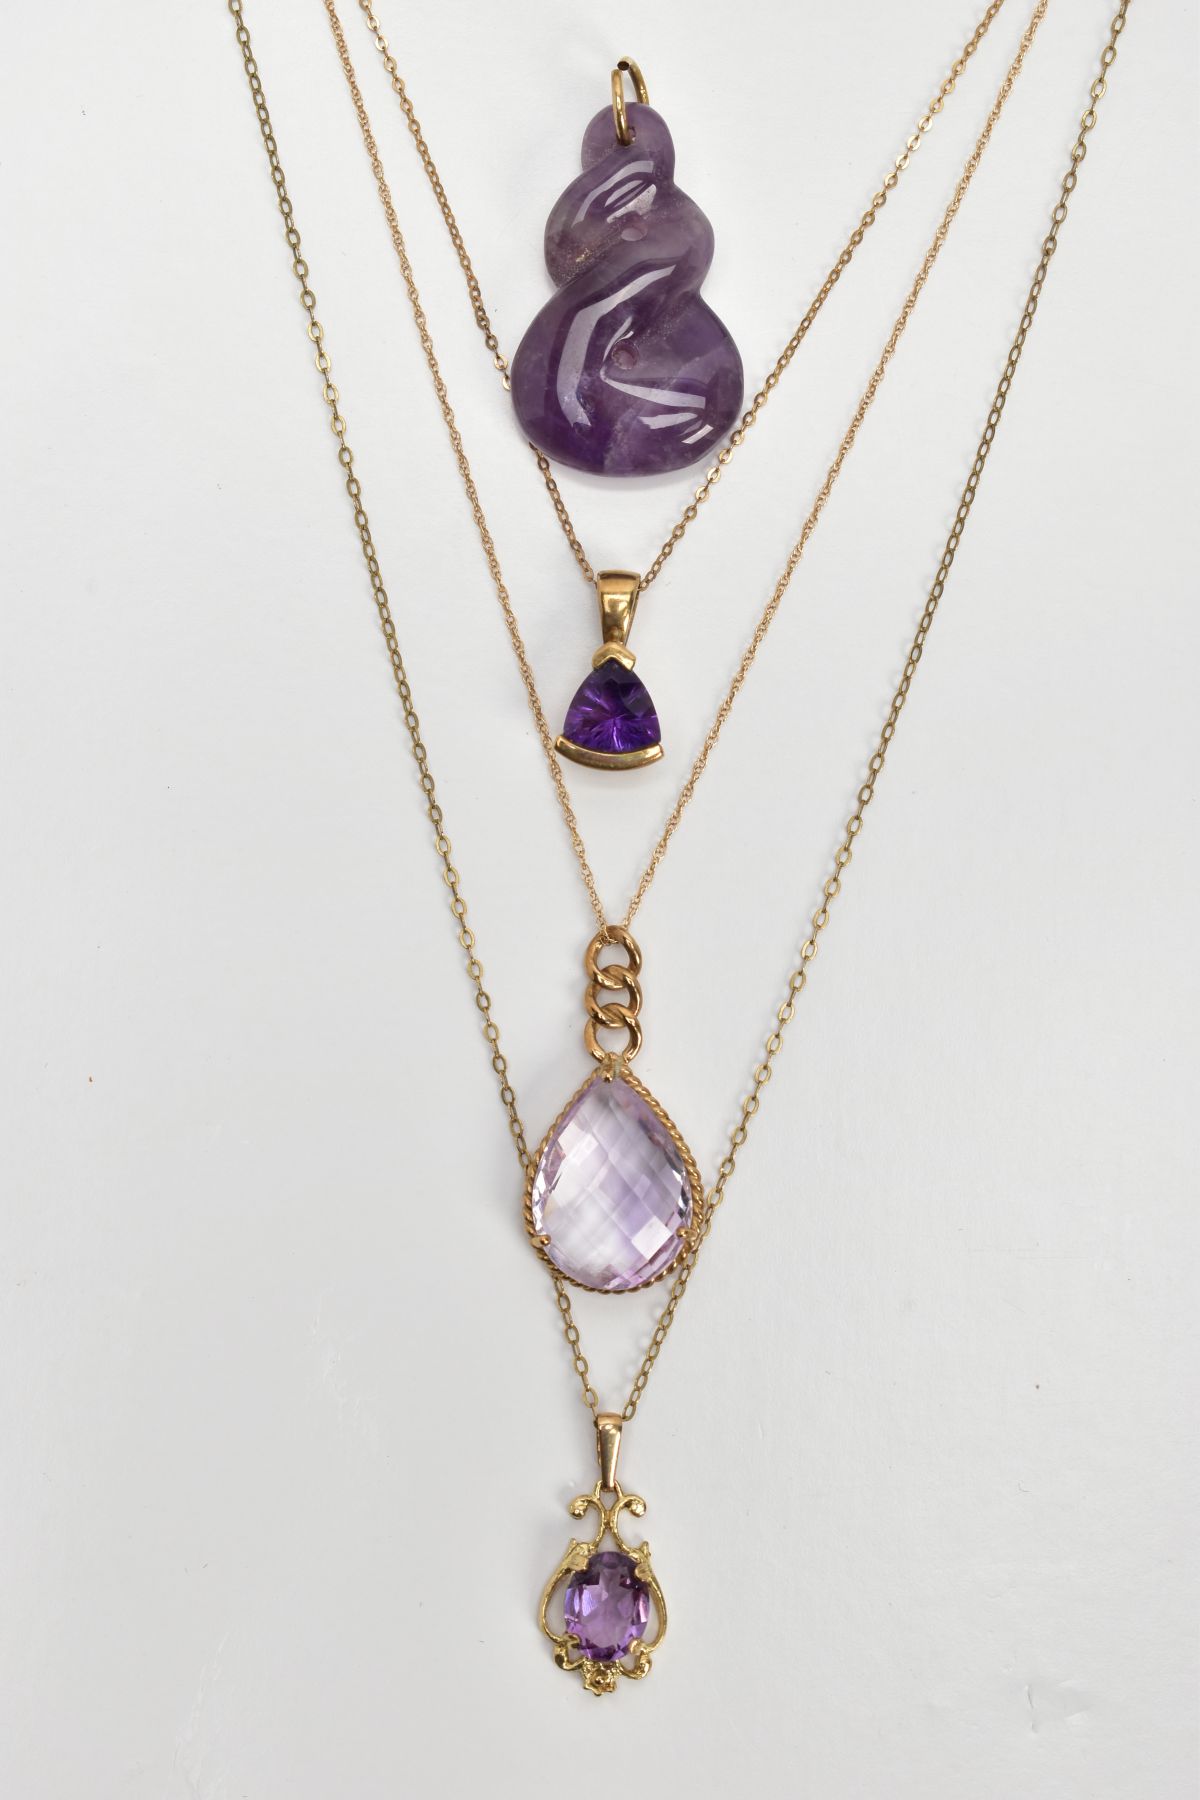 THREE AMETHYST PENDANT NECKLACES AND A CARVED AMETHYST PENDANT, the first a faceted pear cut